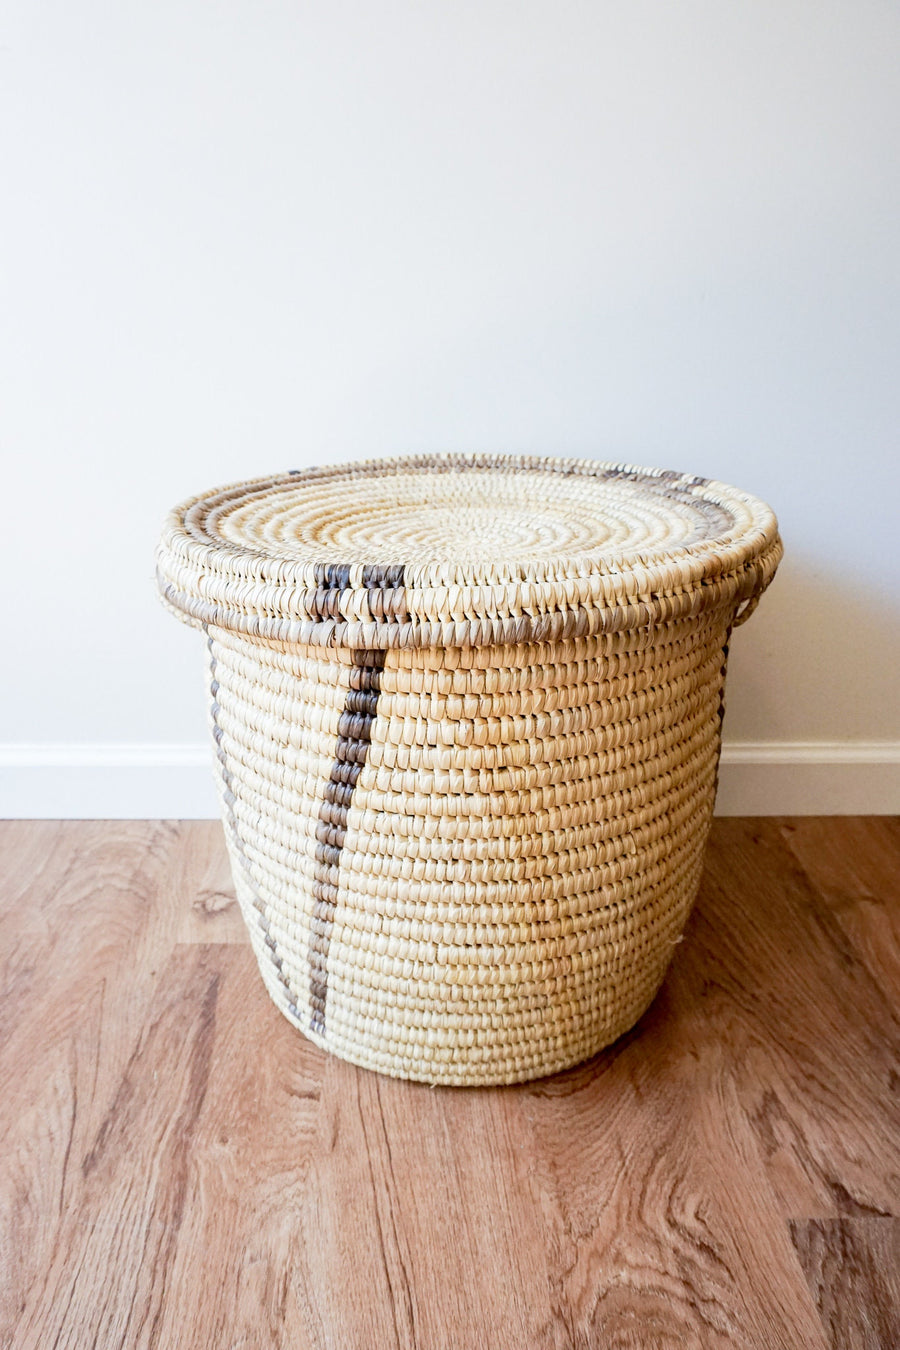 Woven Tribal African Basket with Lid - Large